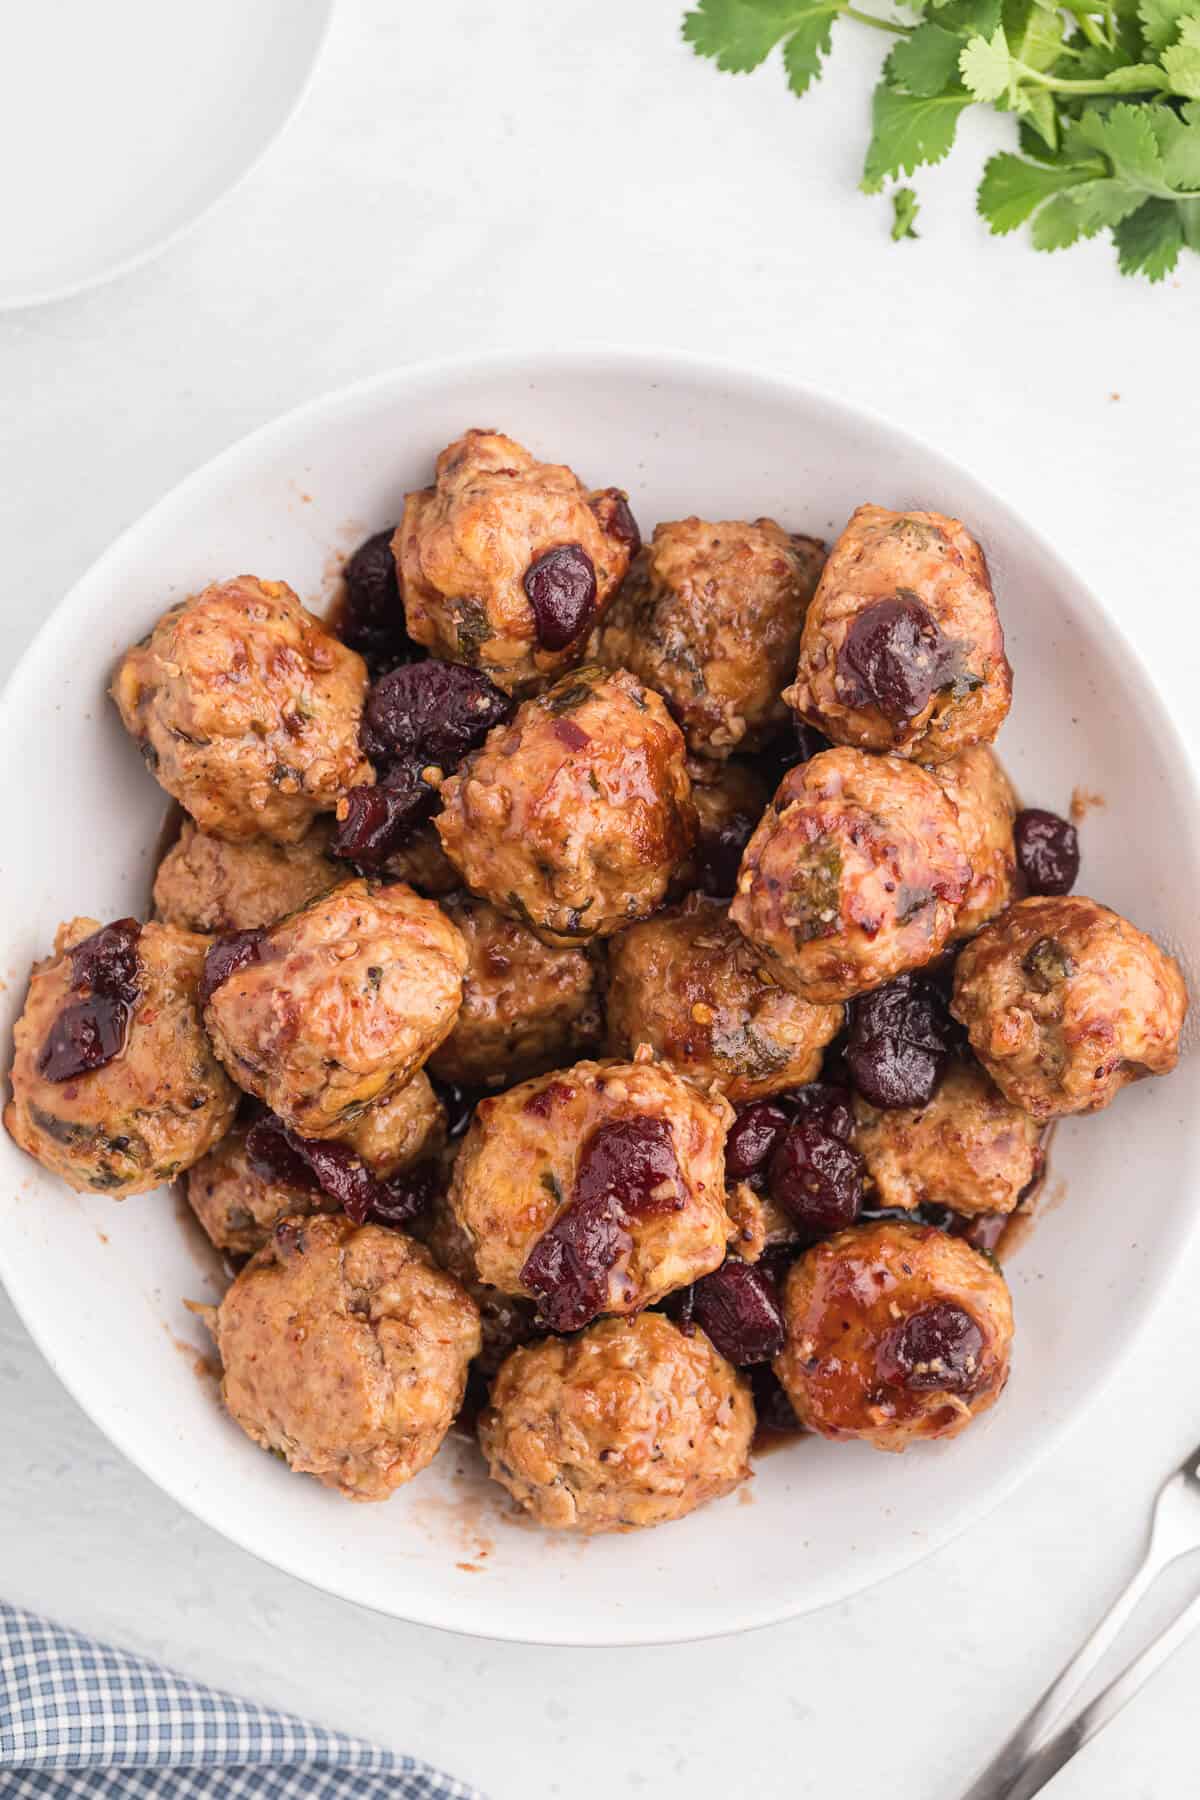 Chili Cranberry Fusion Meatballs - A delicious holiday appetizer! The comforting flavors of cranberry and chili combine for these slow cooker chicken meatballs.